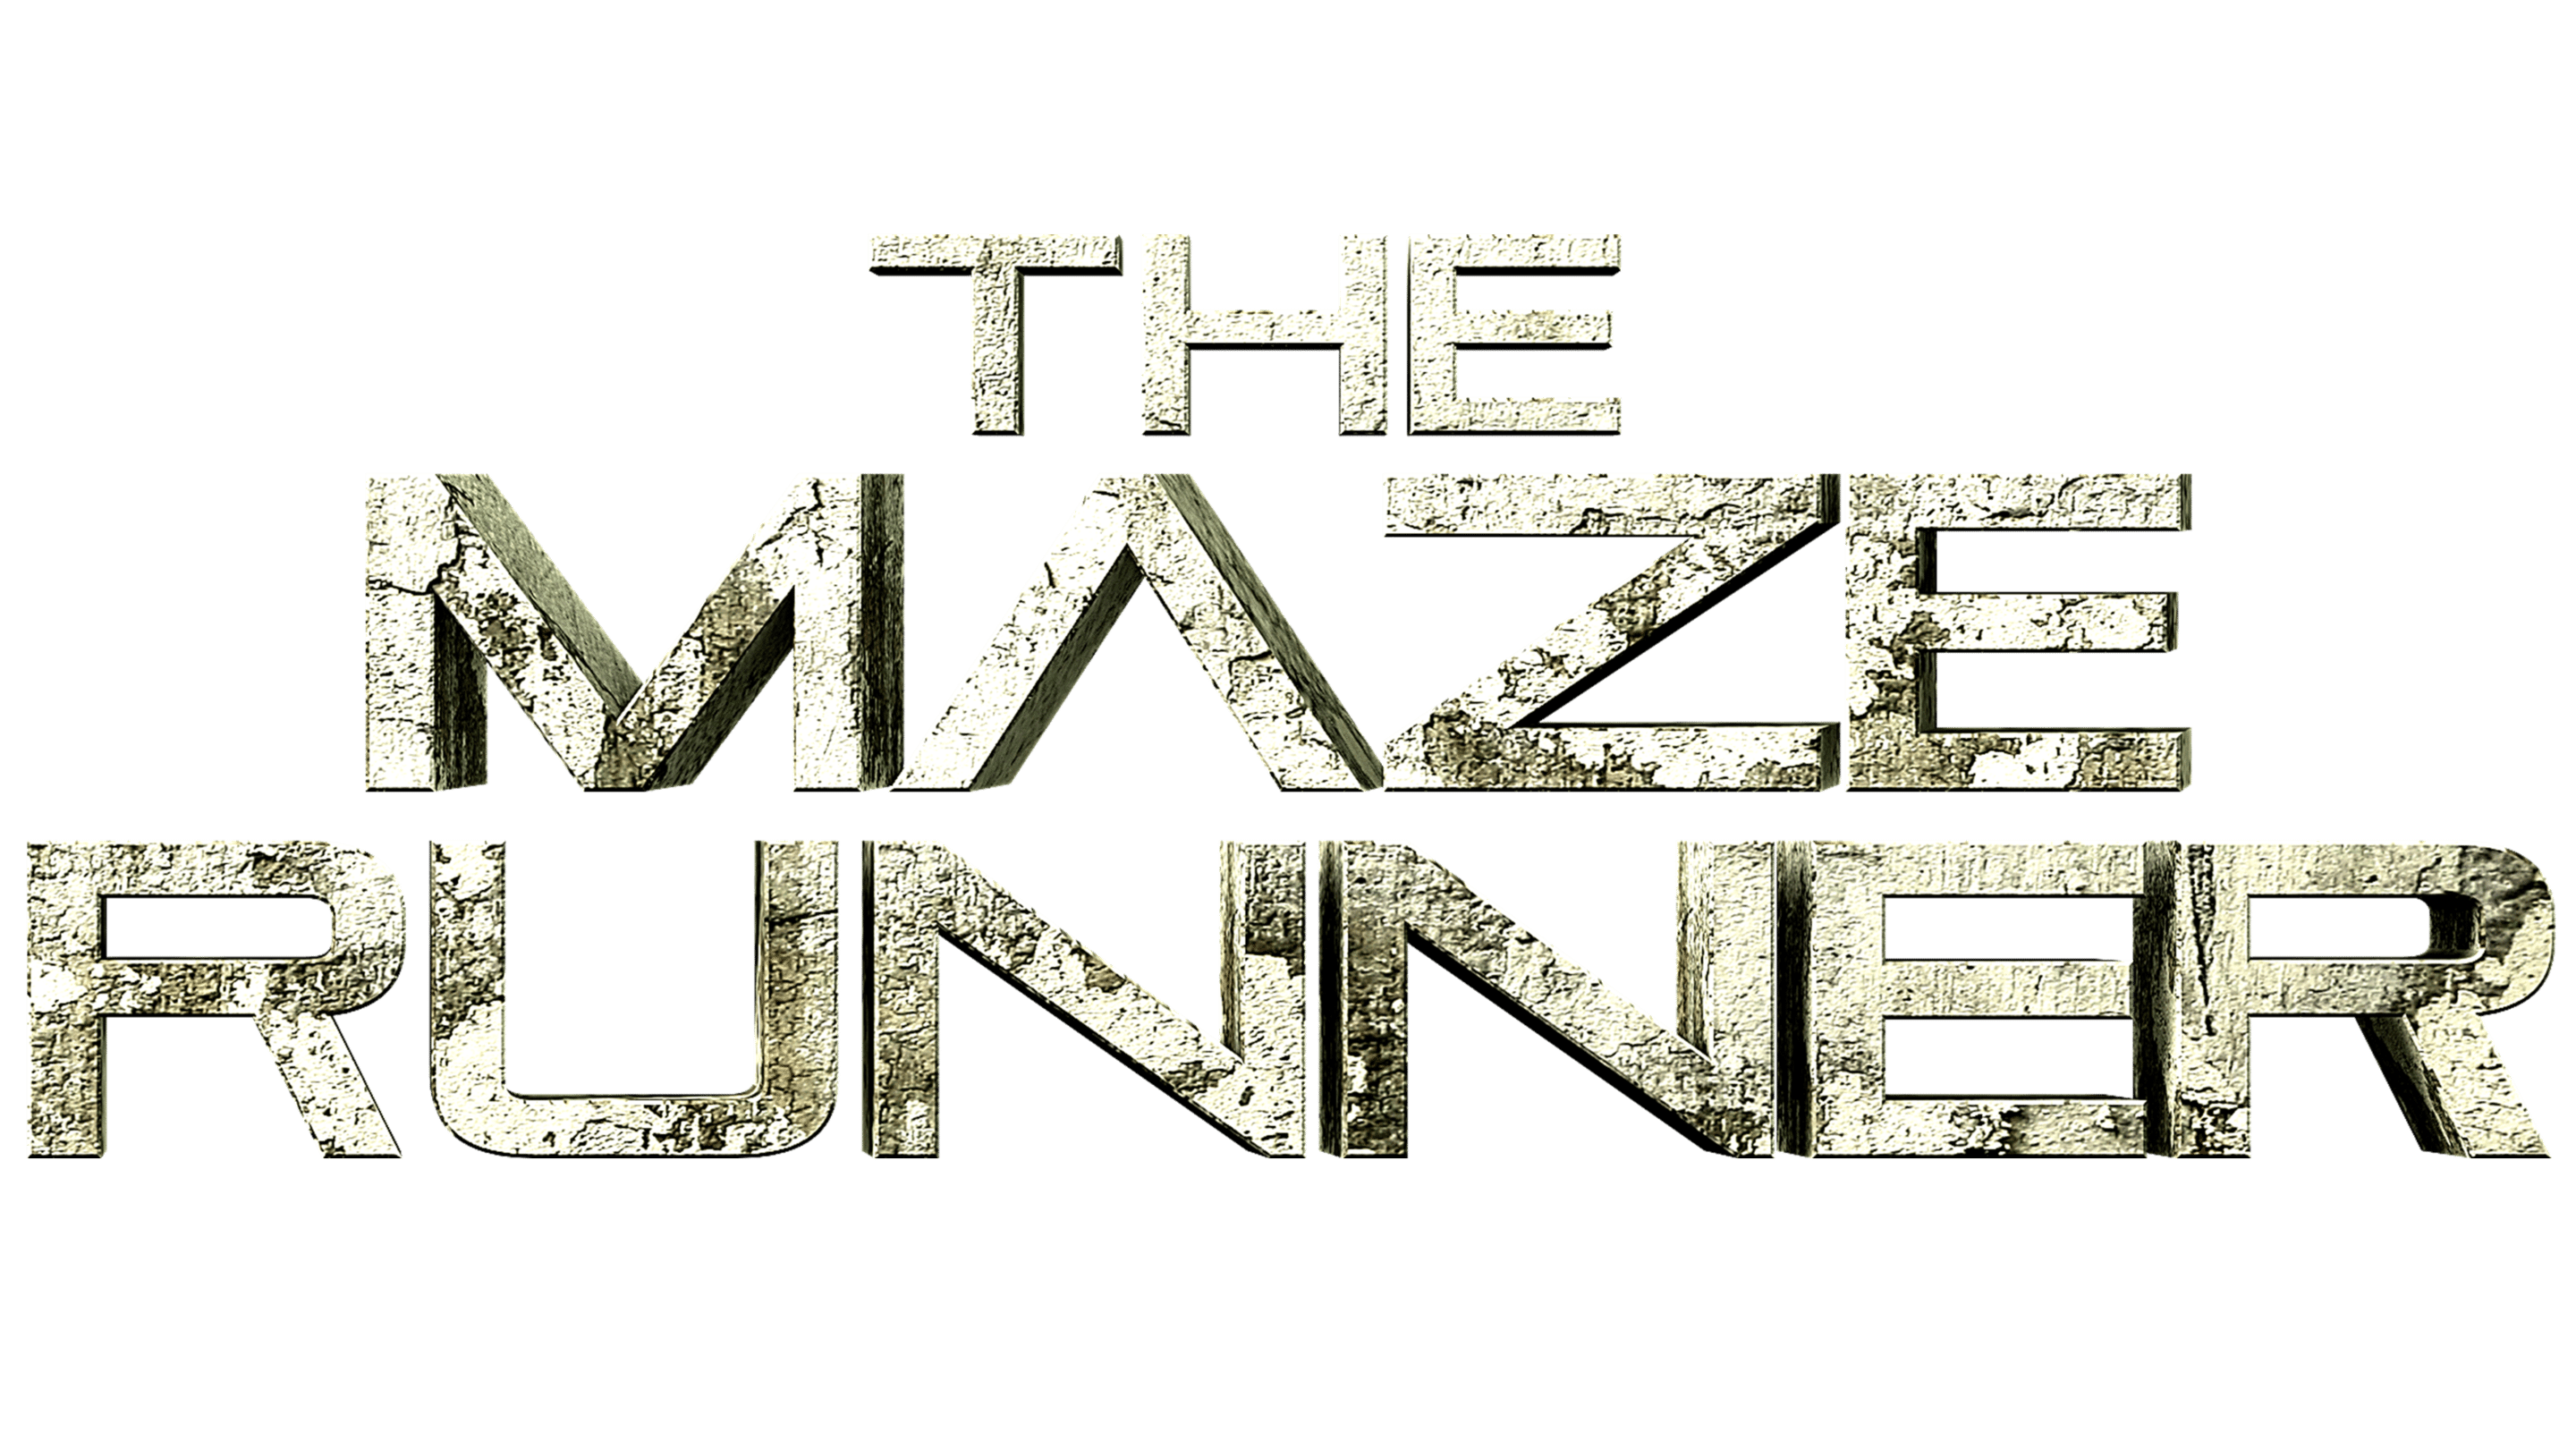 Disney+ Adds New “The Maze Runner” Collection – What's On Disney Plus